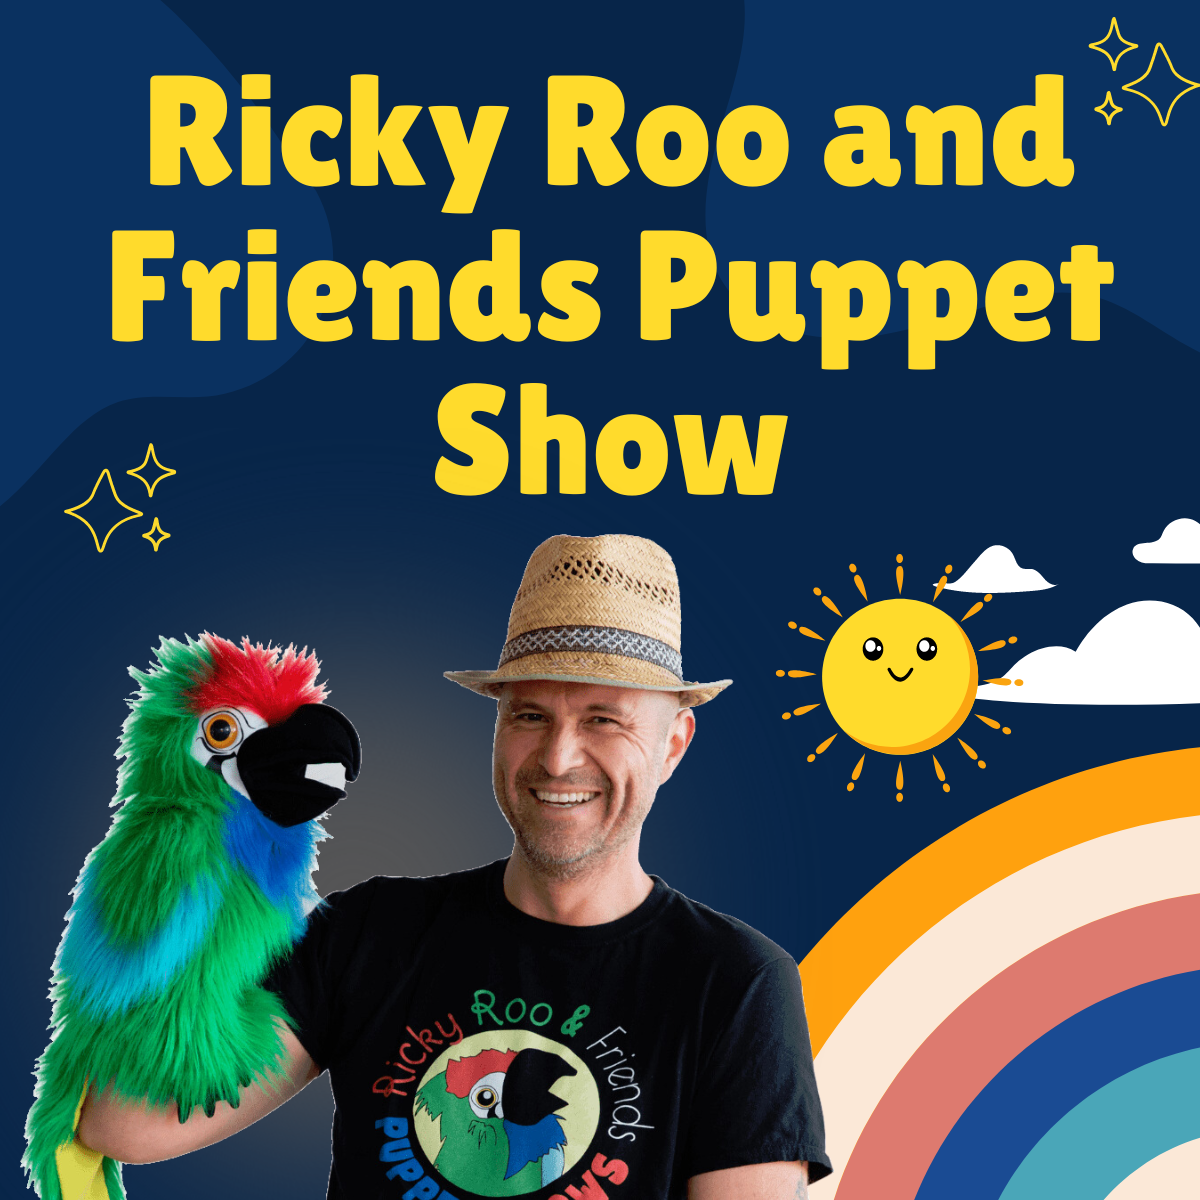 dark blue background, rainbow on bottom corner with sun and clouds. Yellow text says Ricky Roo and Friends puppet show with a picture of ricky roo and parrot puppet in bottom left hand corner